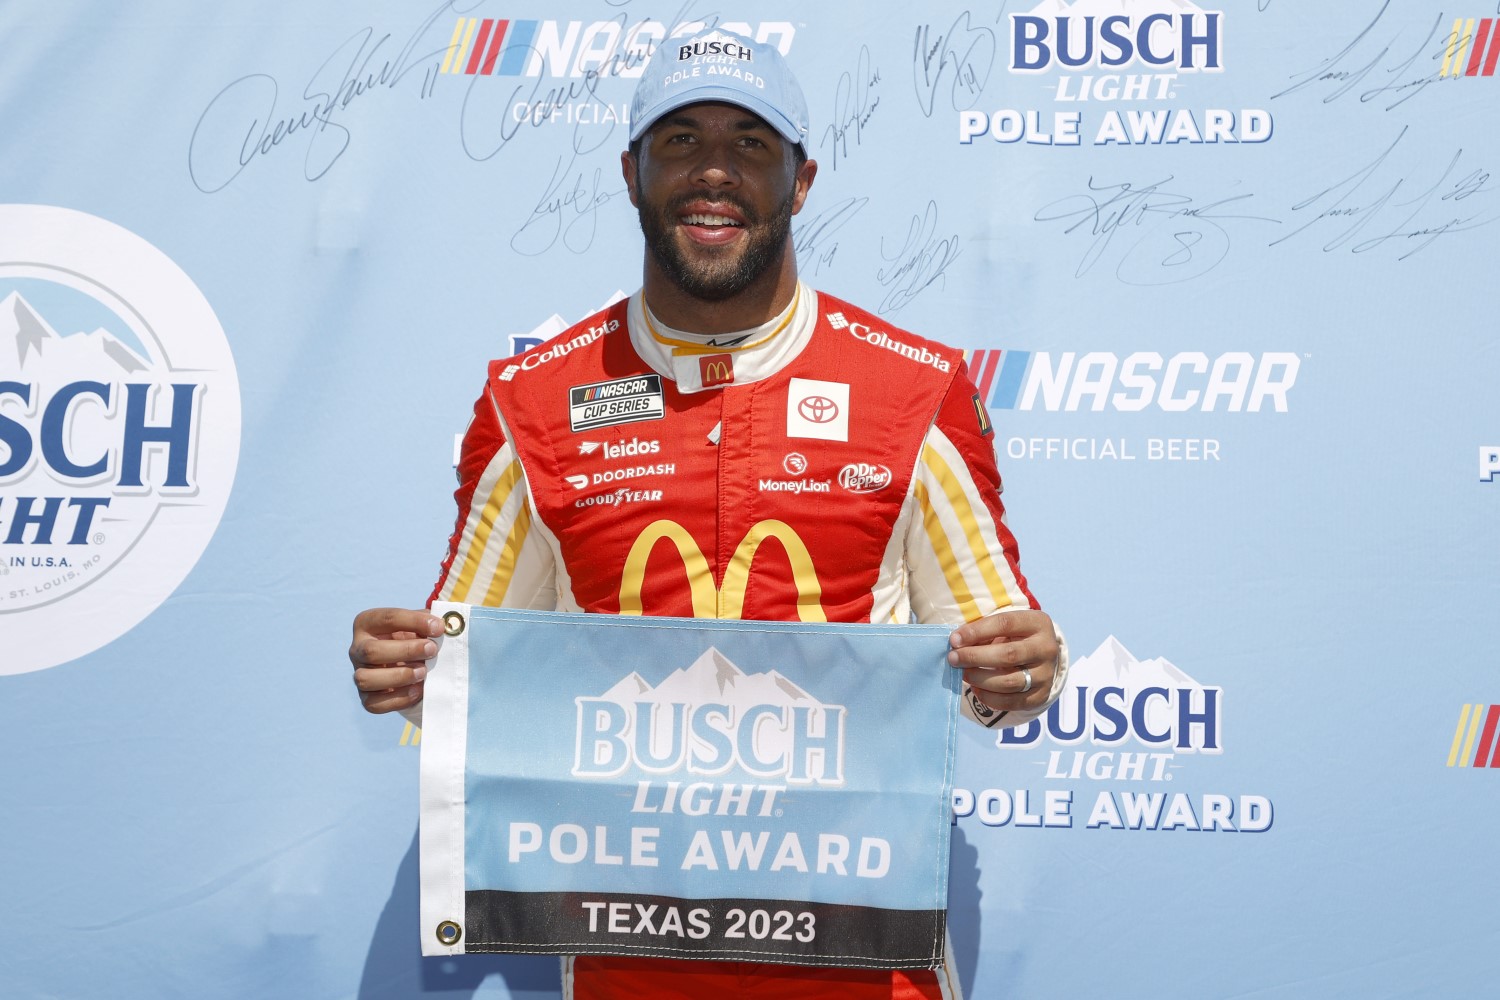 Bubba Wallace, driver of the #23 McDonald's Toyota, poses for photos after winning the pole award during qualifying for the NASCAR Cup Series Autotrader EchoPark Automotive 400 at Texas Motor Speedway on September 23, 2023 in Fort Worth, Texas. (Photo by Chris Graythen/Getty Images)